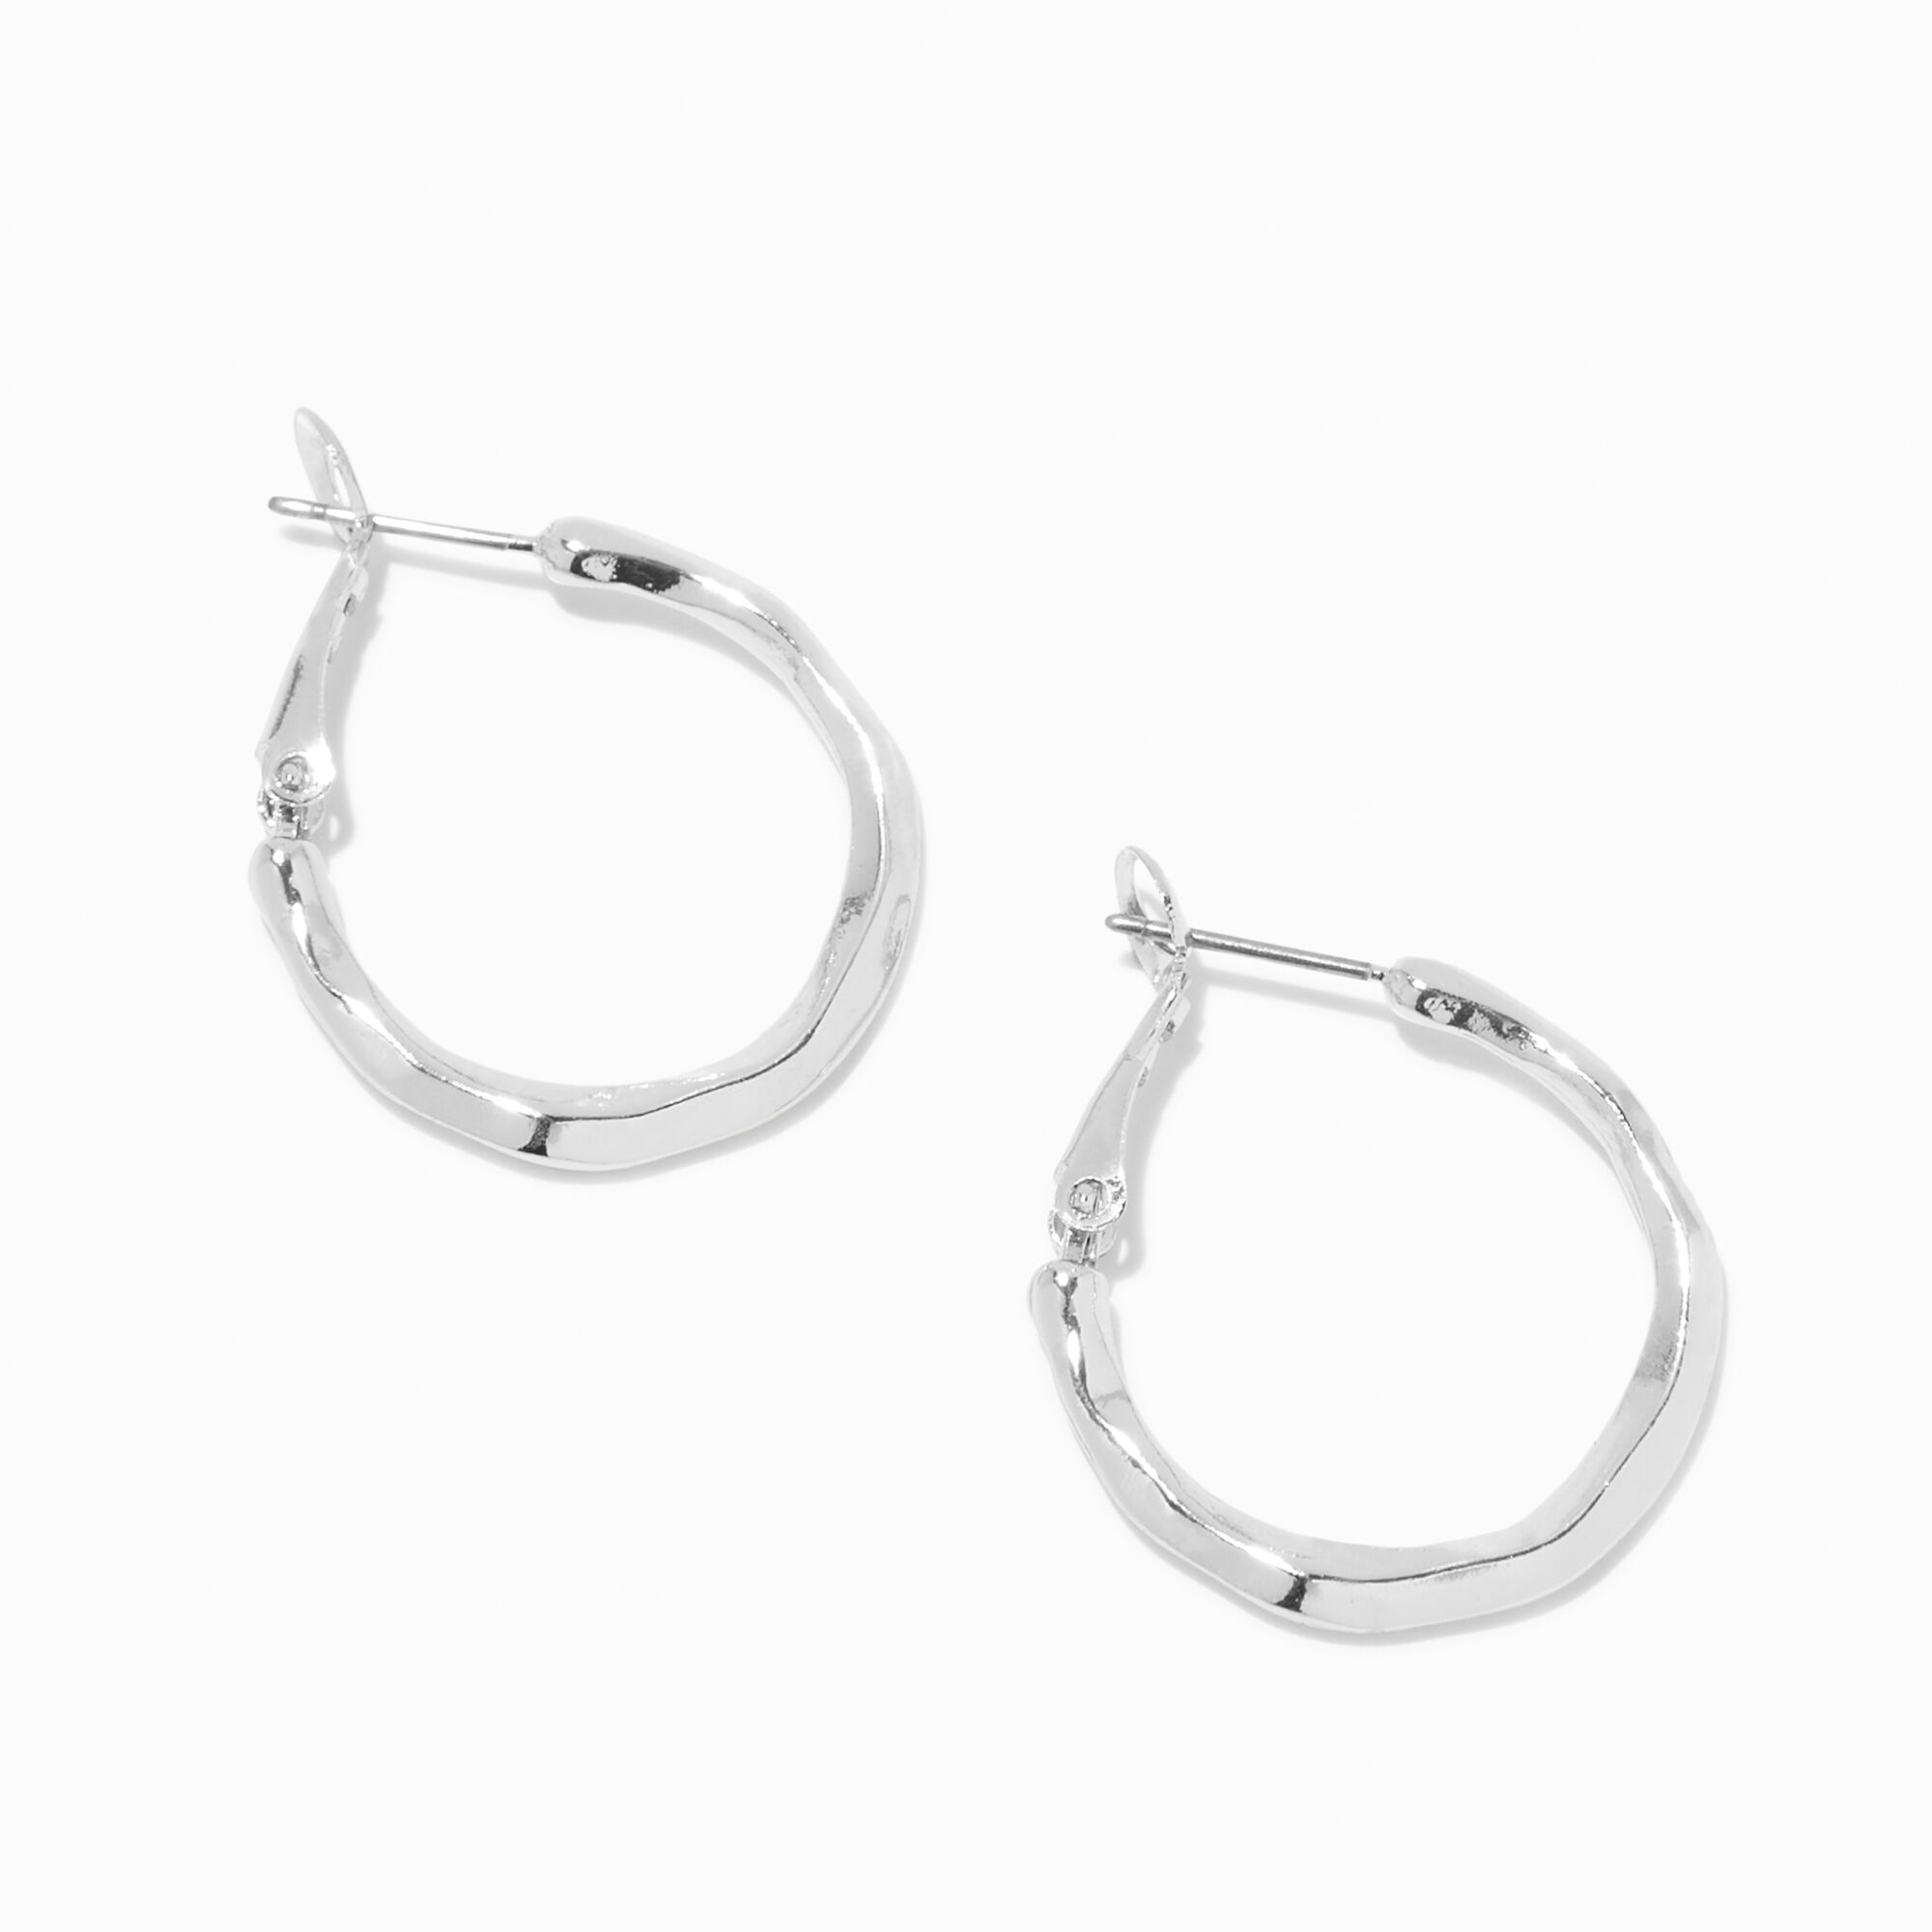 View Claires Tone 25MM Molten Hoop Earrings Silver information